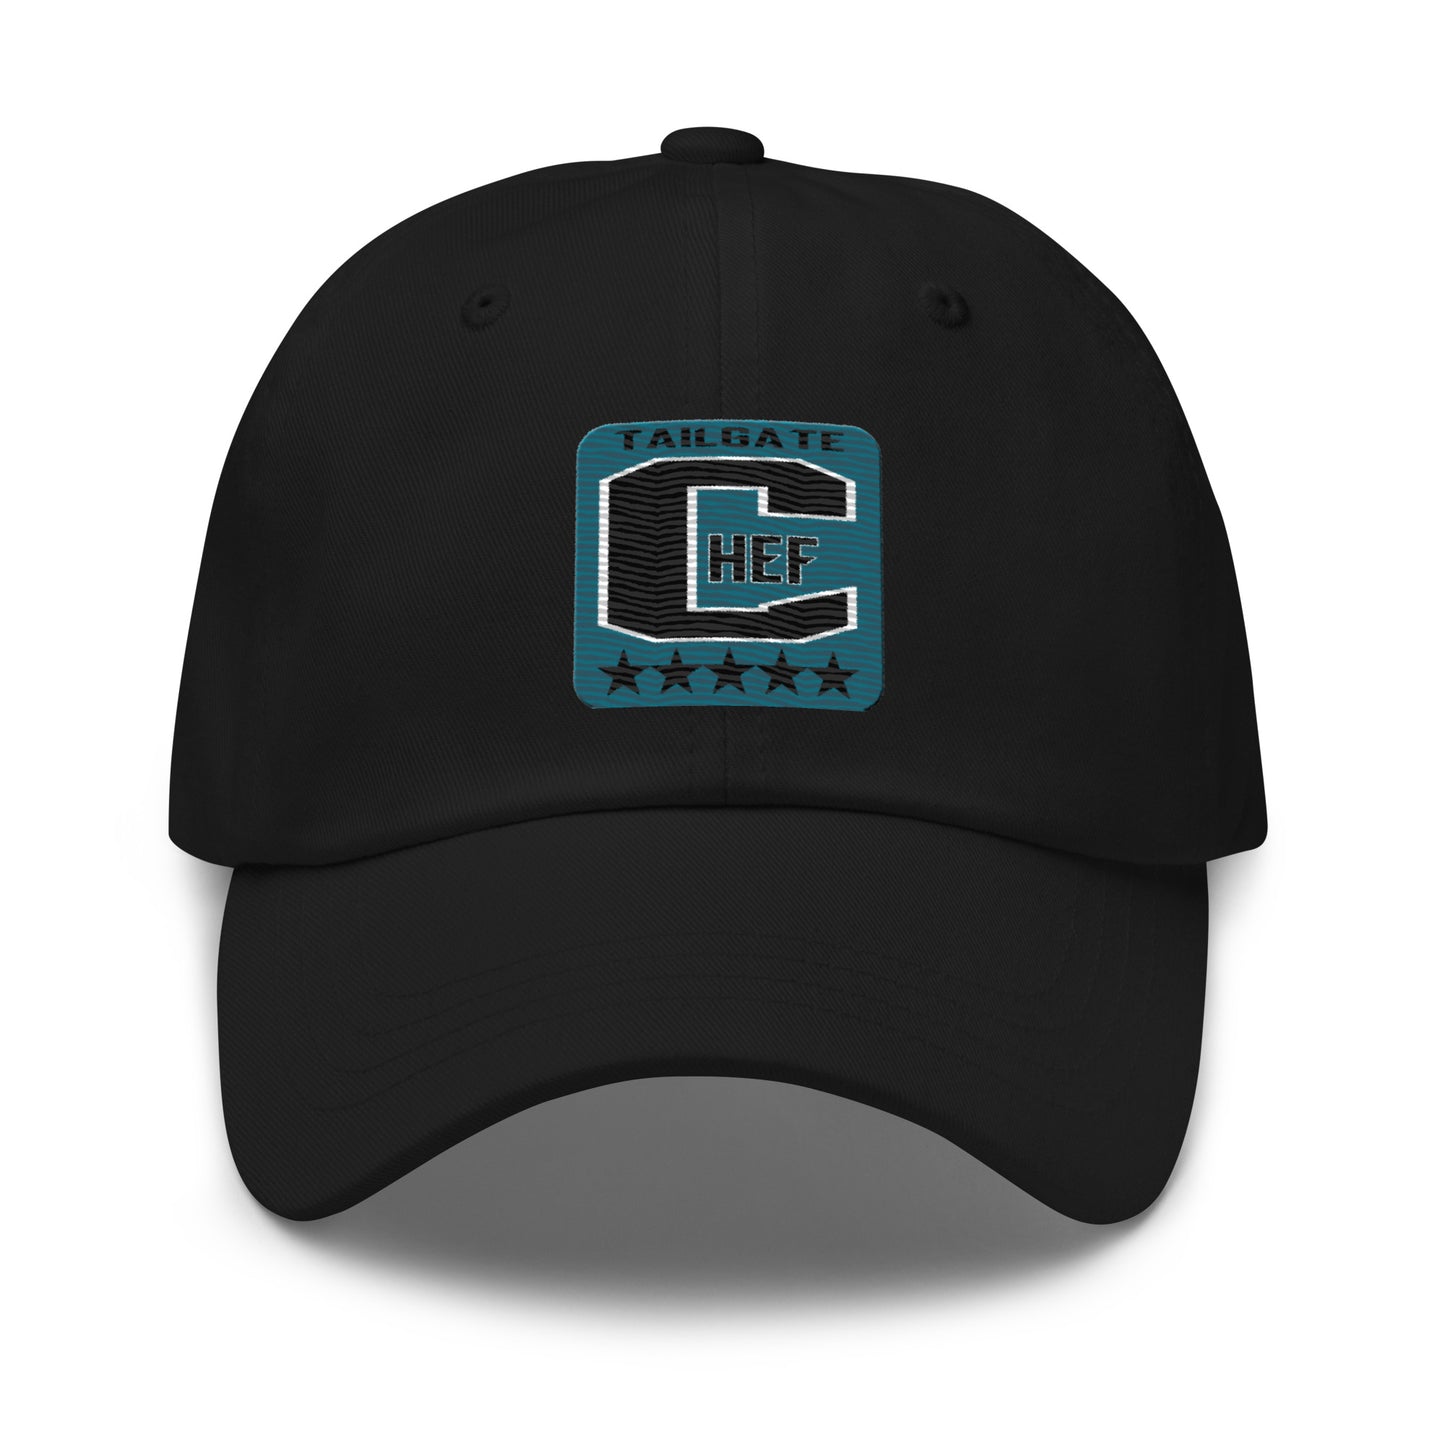 The Tailgate Chef Low Pro Hat